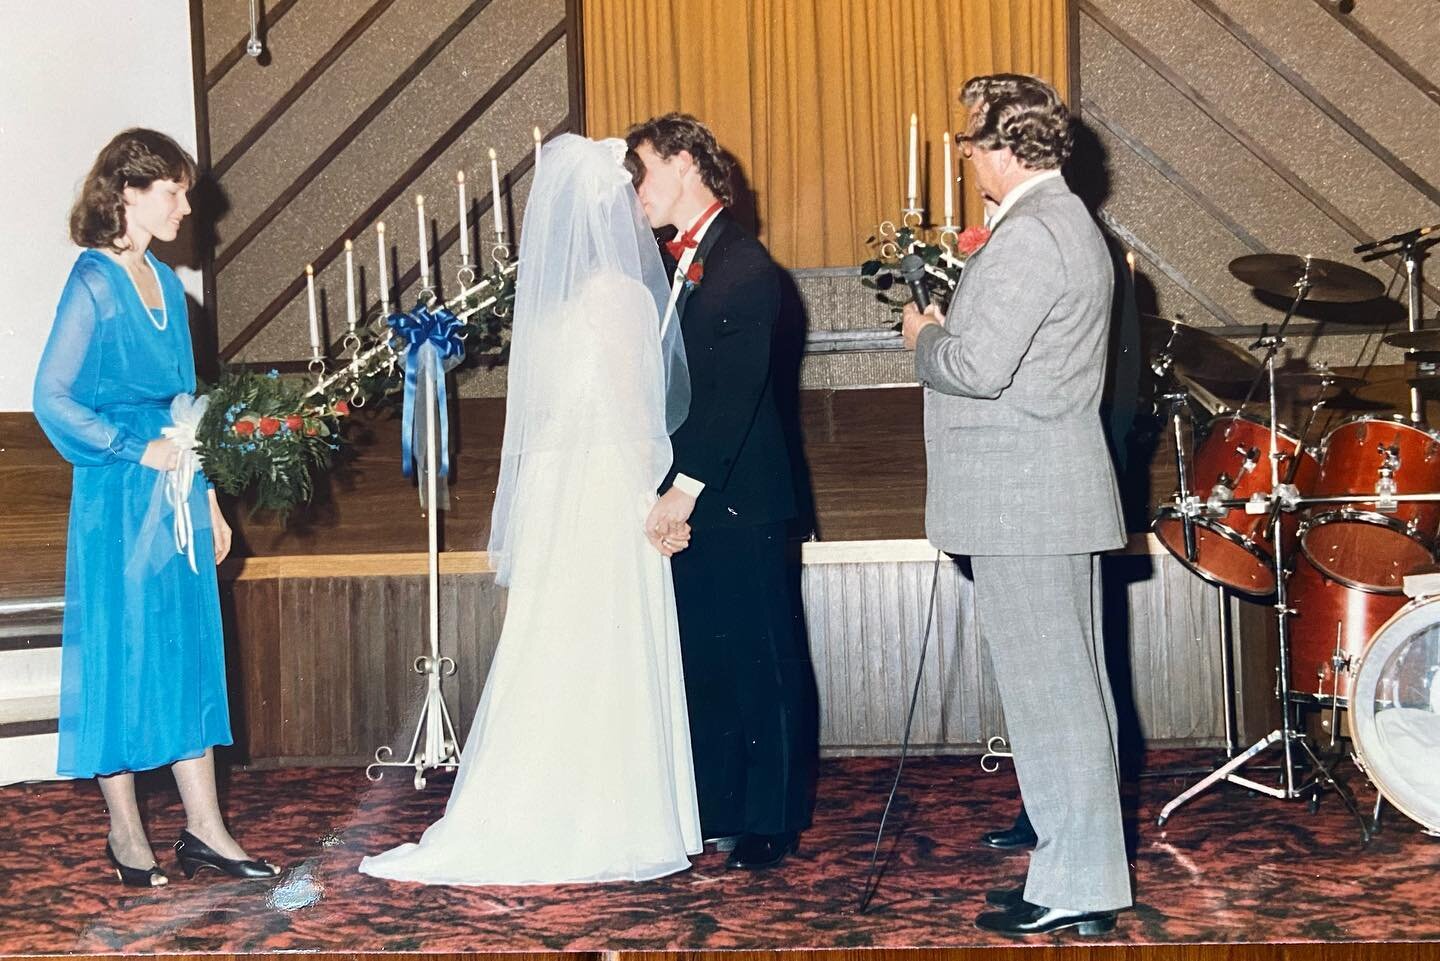 On the 24th day of November 1984 Joyce and I made the best decision and commitment of our life. To love, support, listen and forgive each other till we are parted by death. 38 years later we are still doing all of those things . . . still finding joy